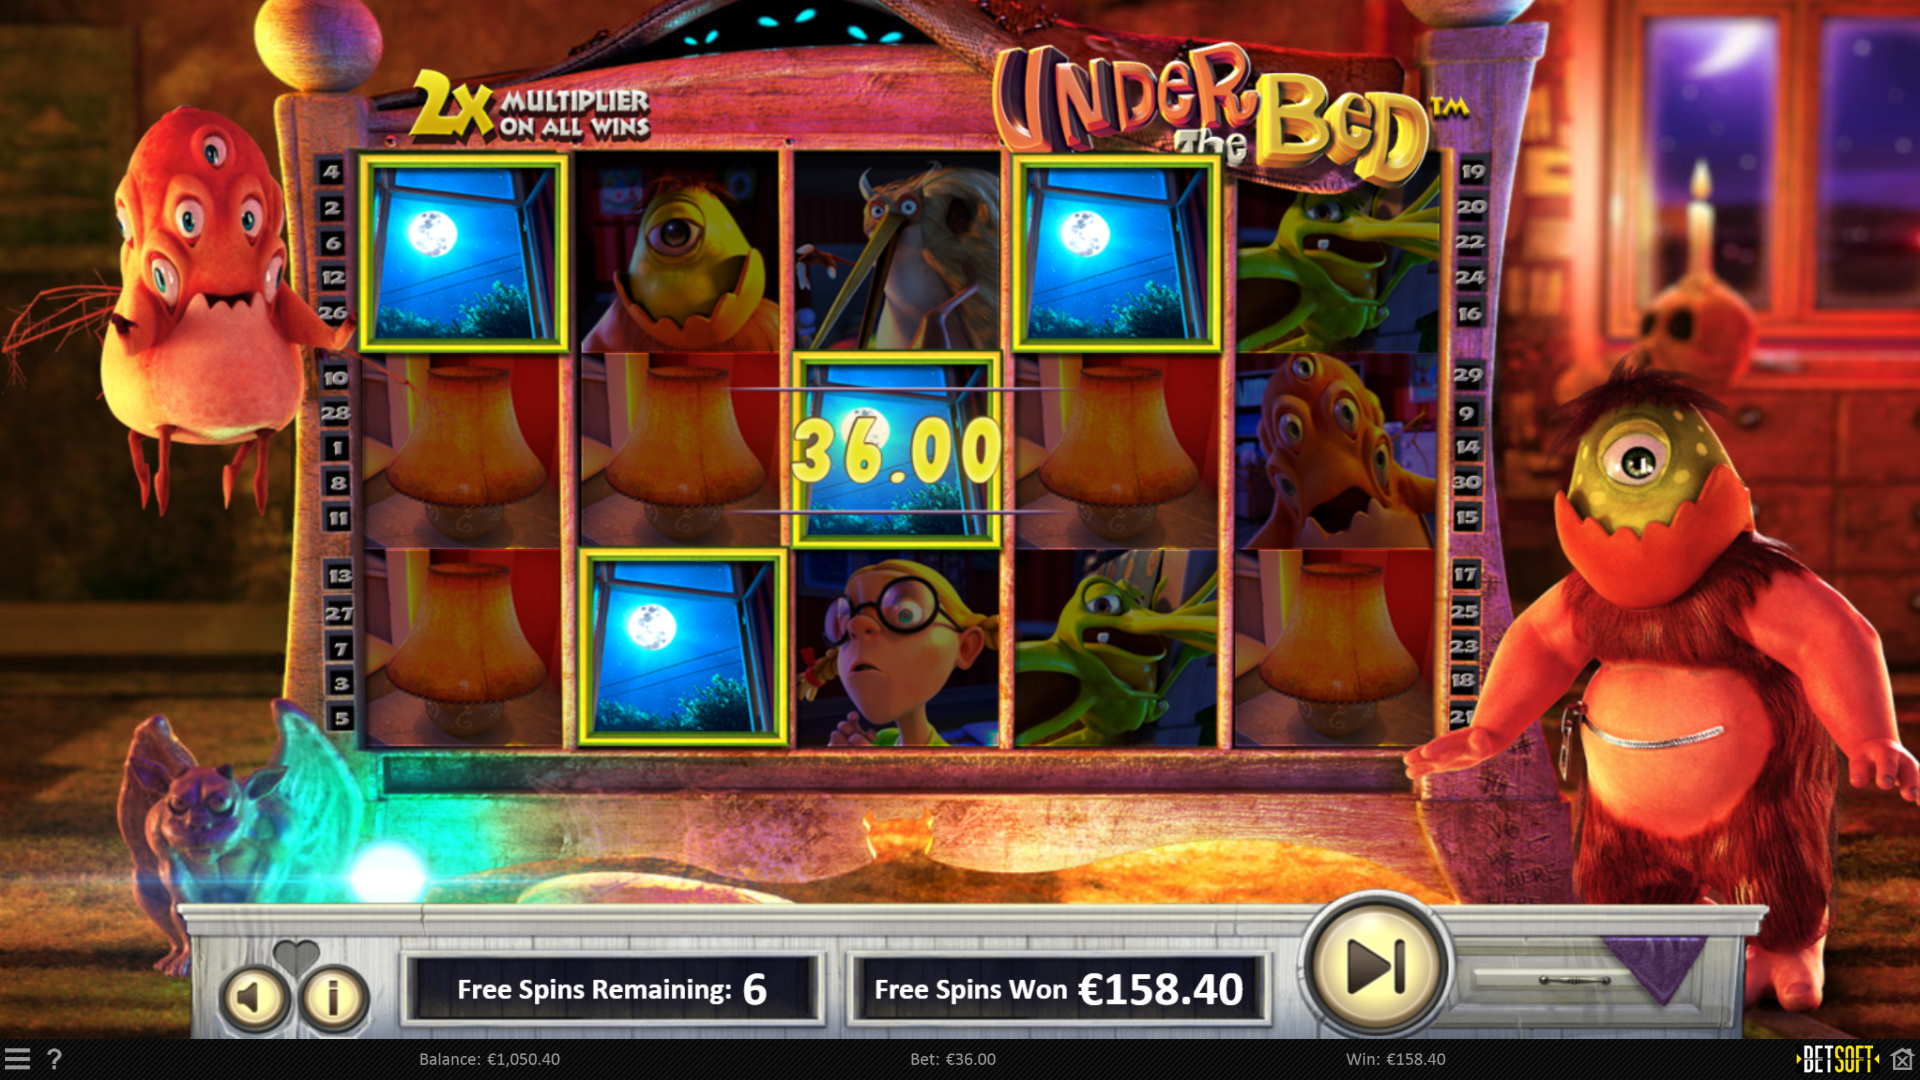 Under The Bed - Free Spins